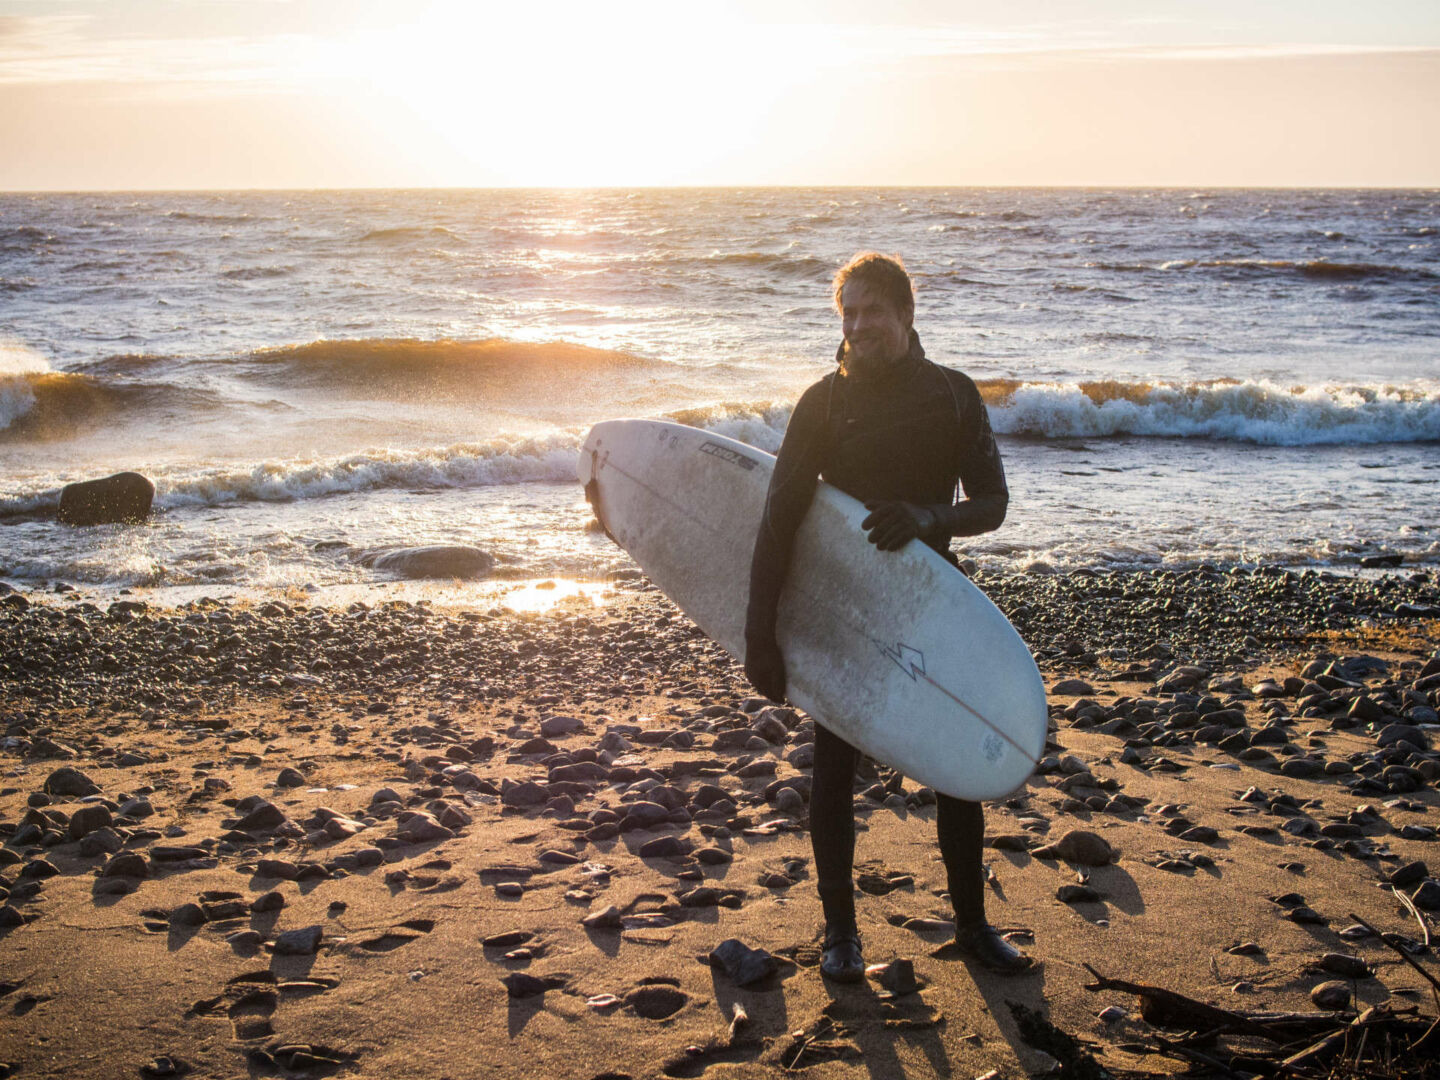 Surfing on the sea in Finnish Lapland